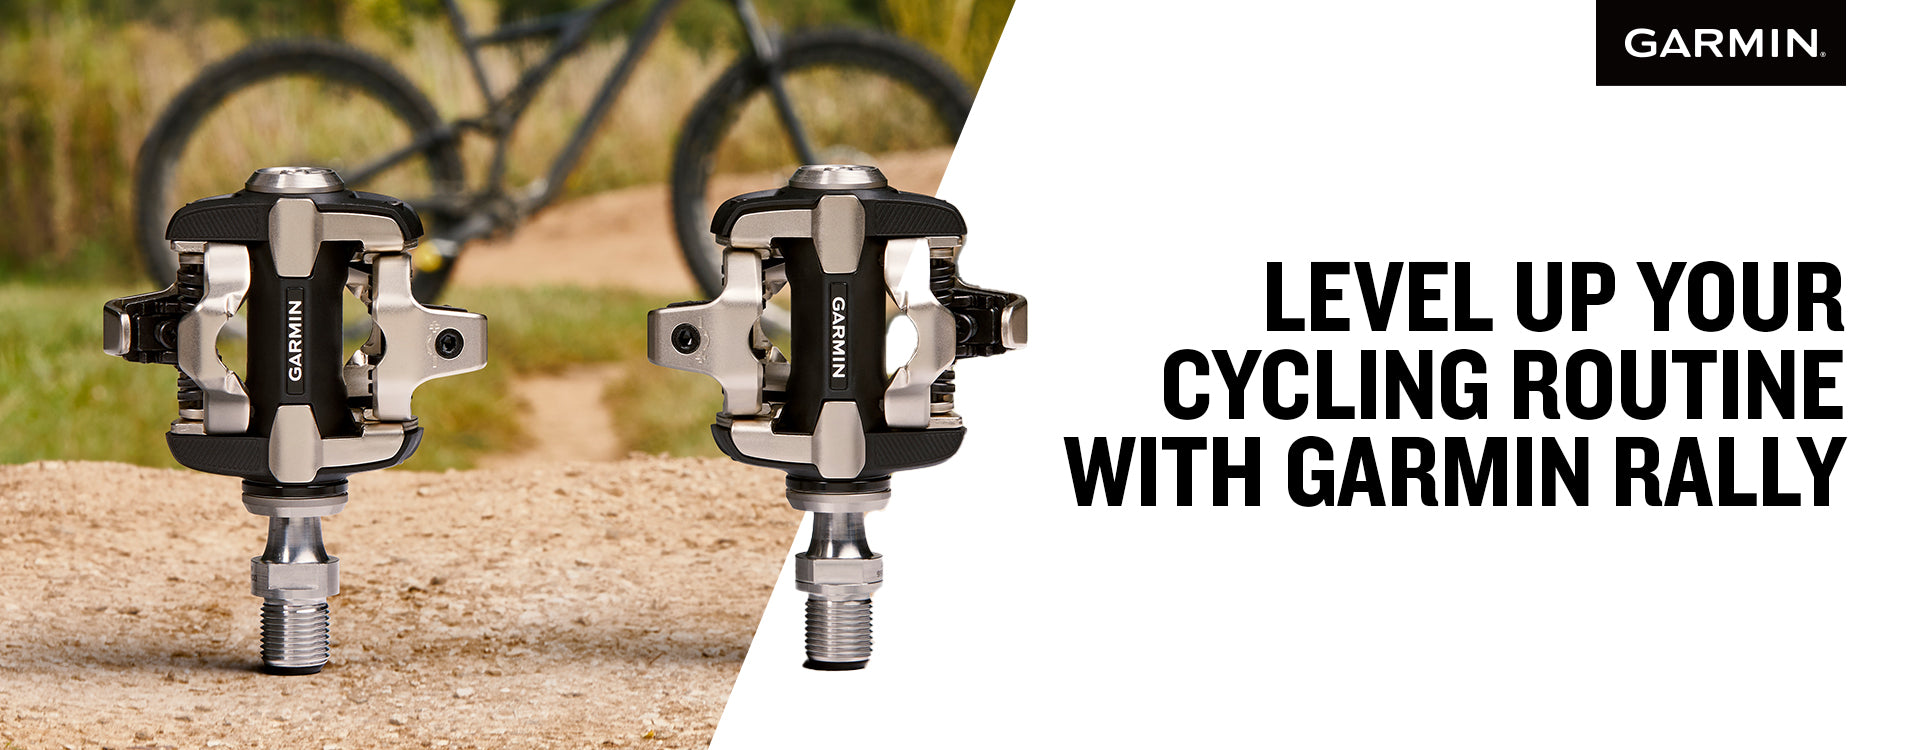 Level Up Your Cycling Routine with Garmin Rally